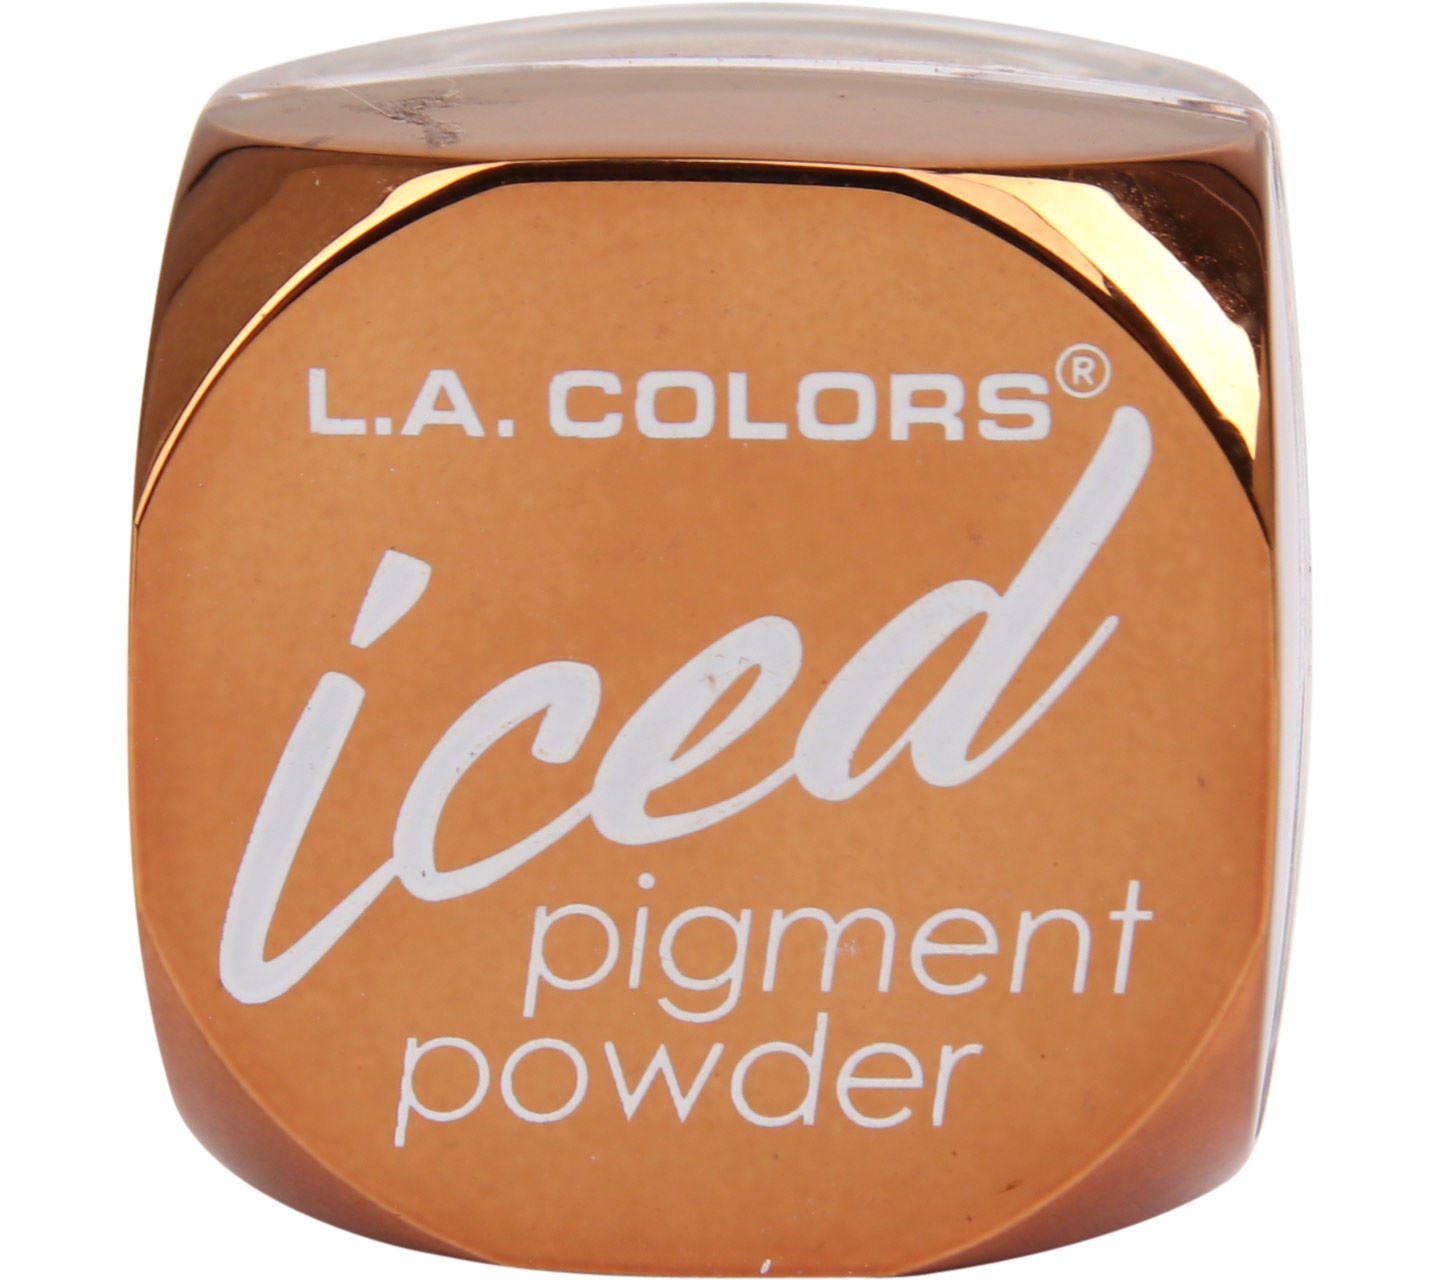 L.A. Colors Iced Pigment Powder CEP 532 Glowing Eyes